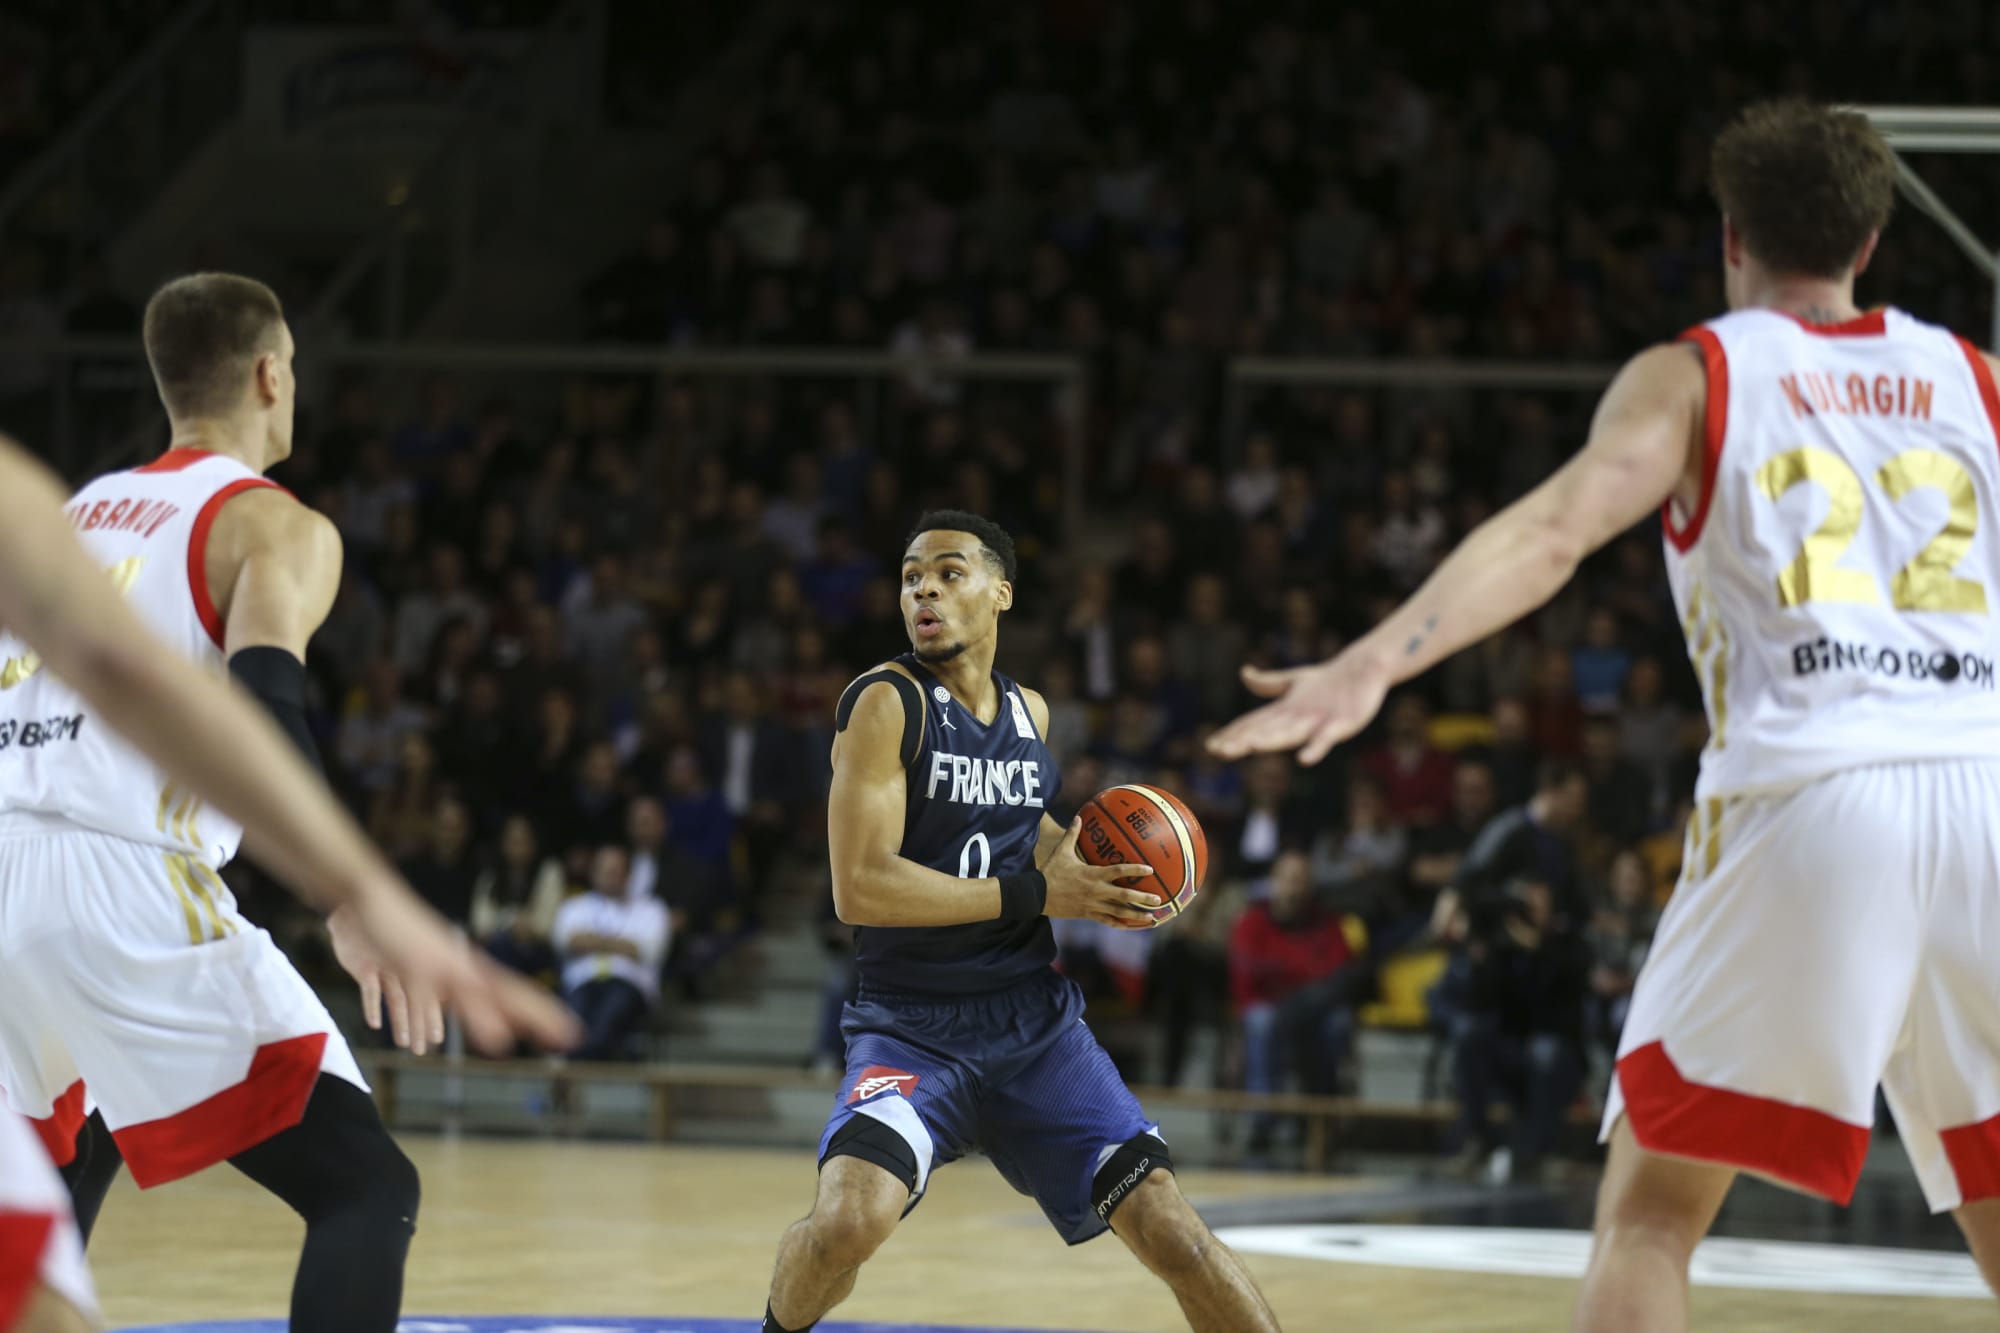 BasketNews on X: France and Lebanon engage in intense on-court